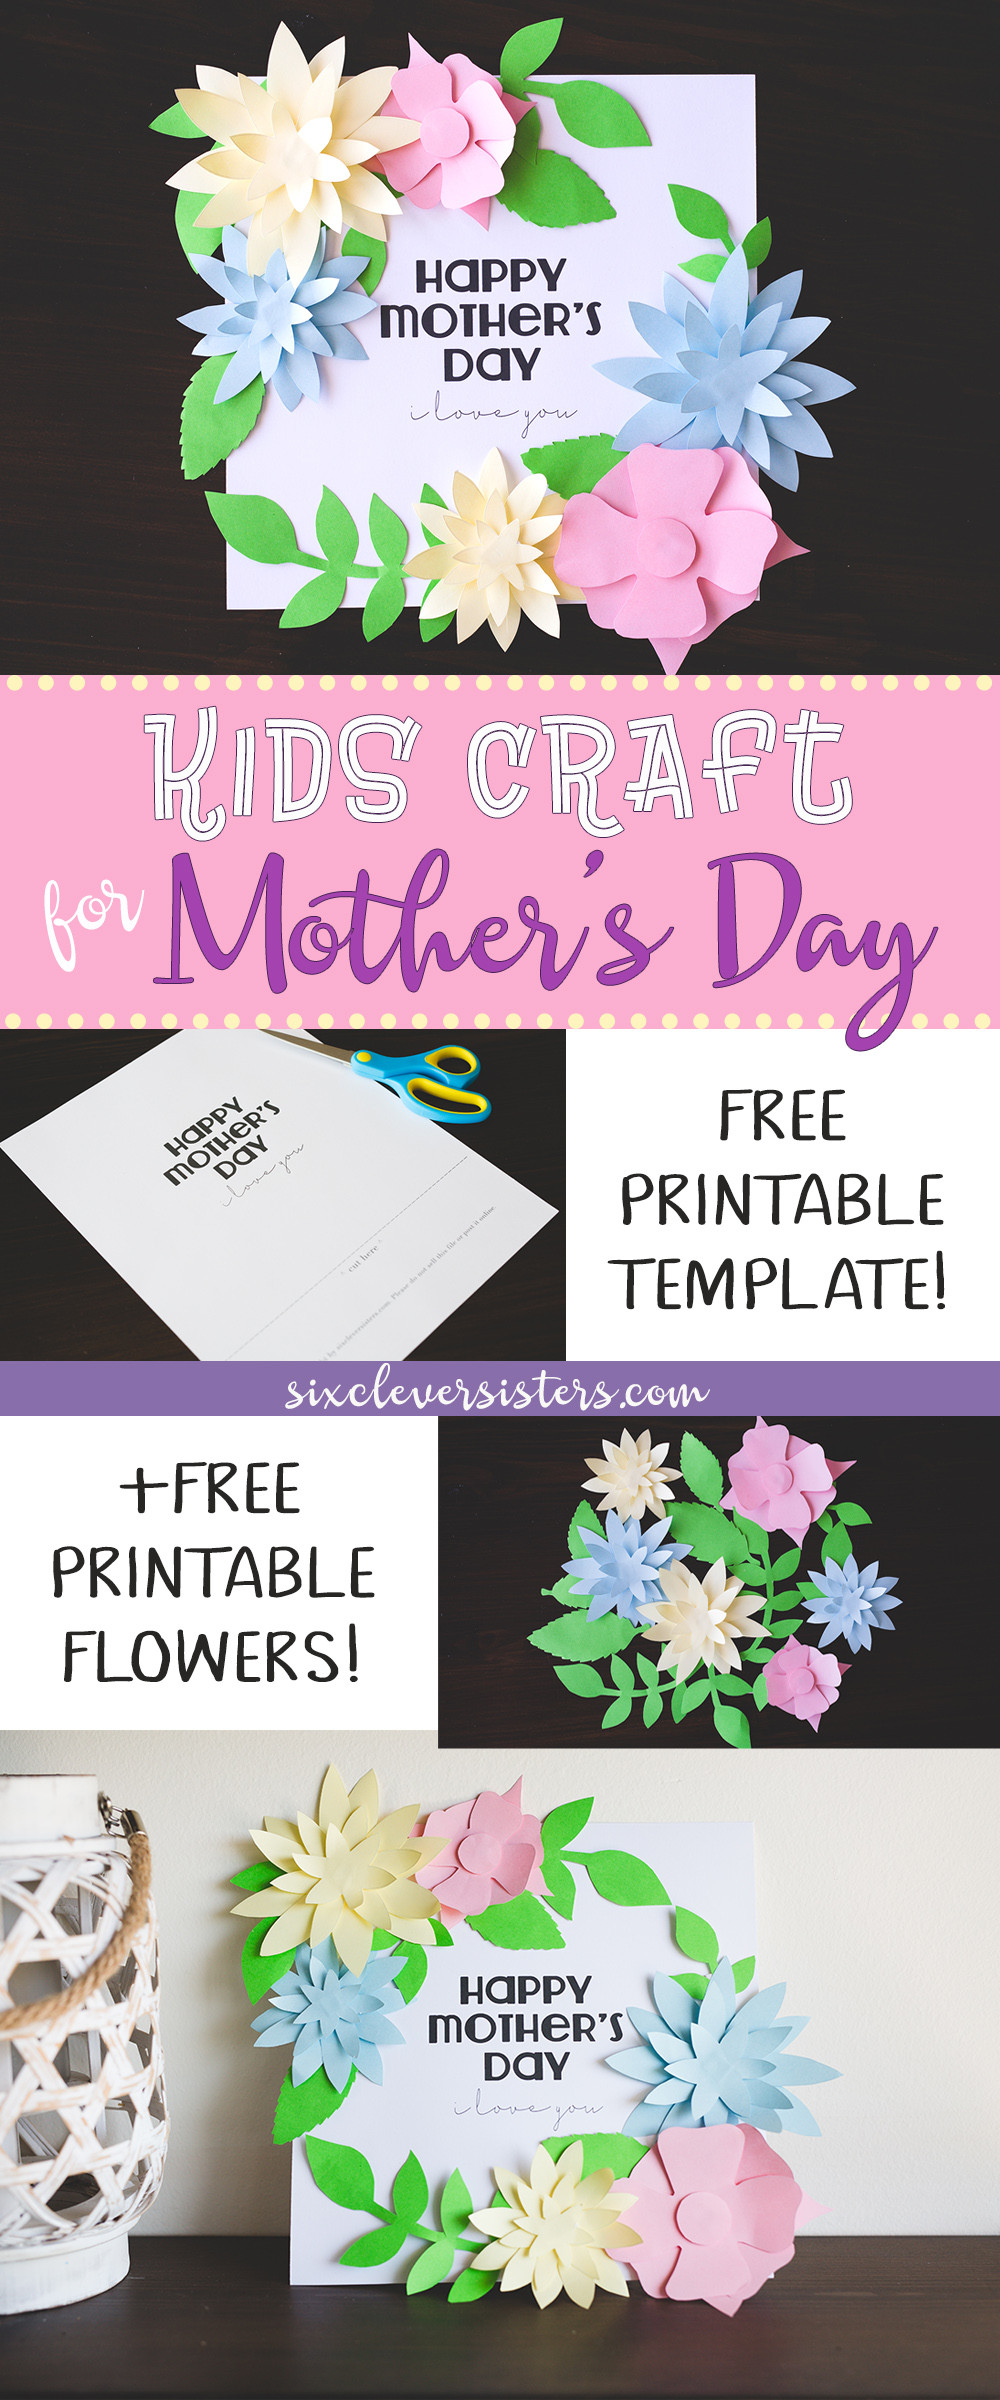 Mother'S Day Craft Ideas For Kids
 Mother s Day Crafts for Kids Free Printable Templates